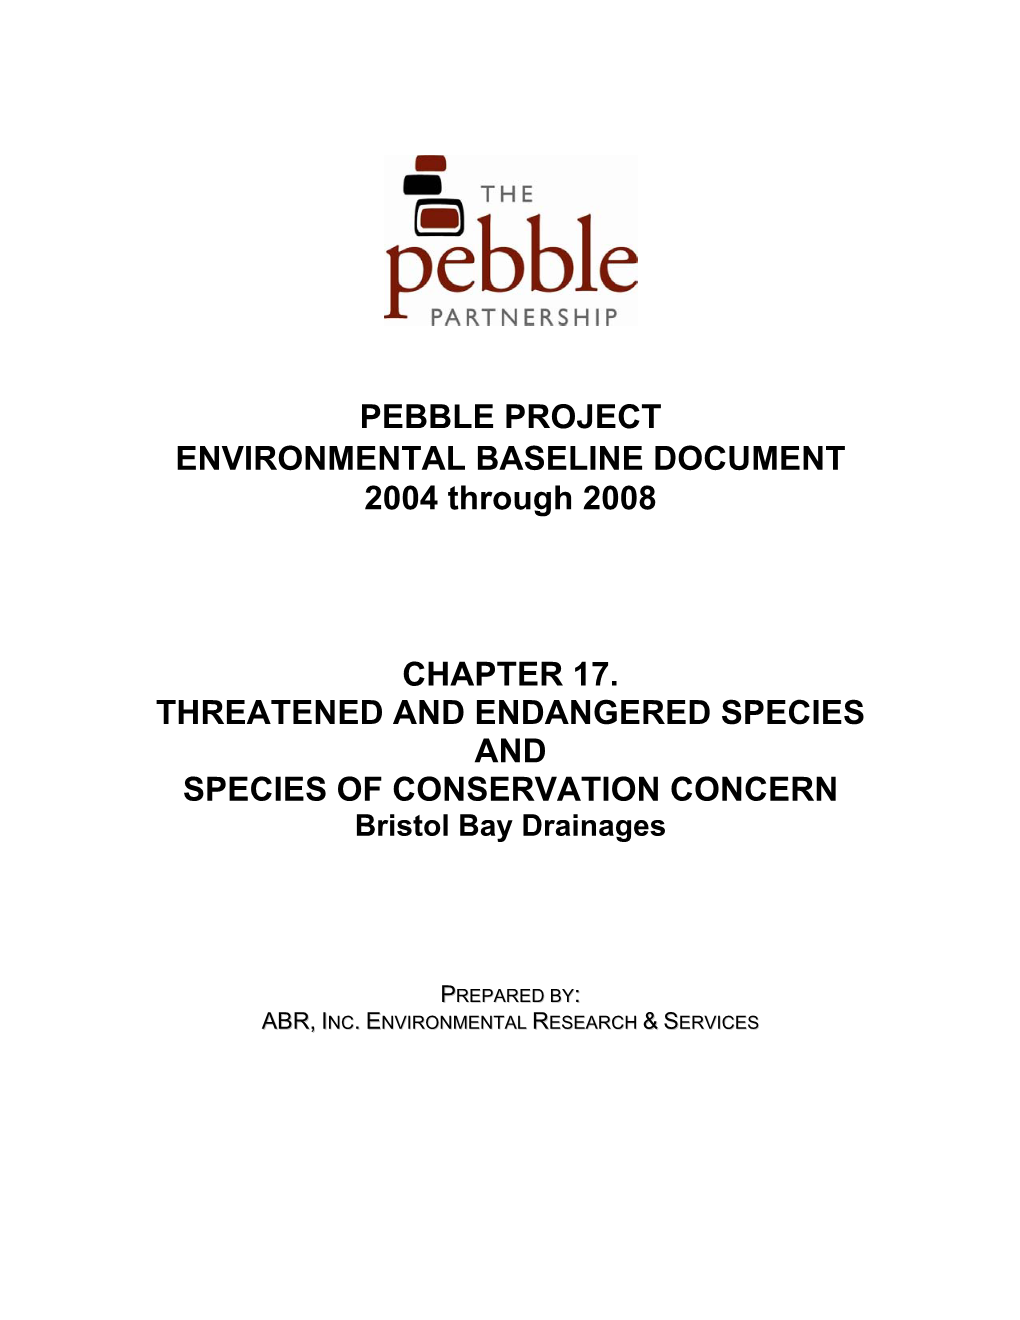 Threatened and Endangered Species (Bristol Bay Drainages)